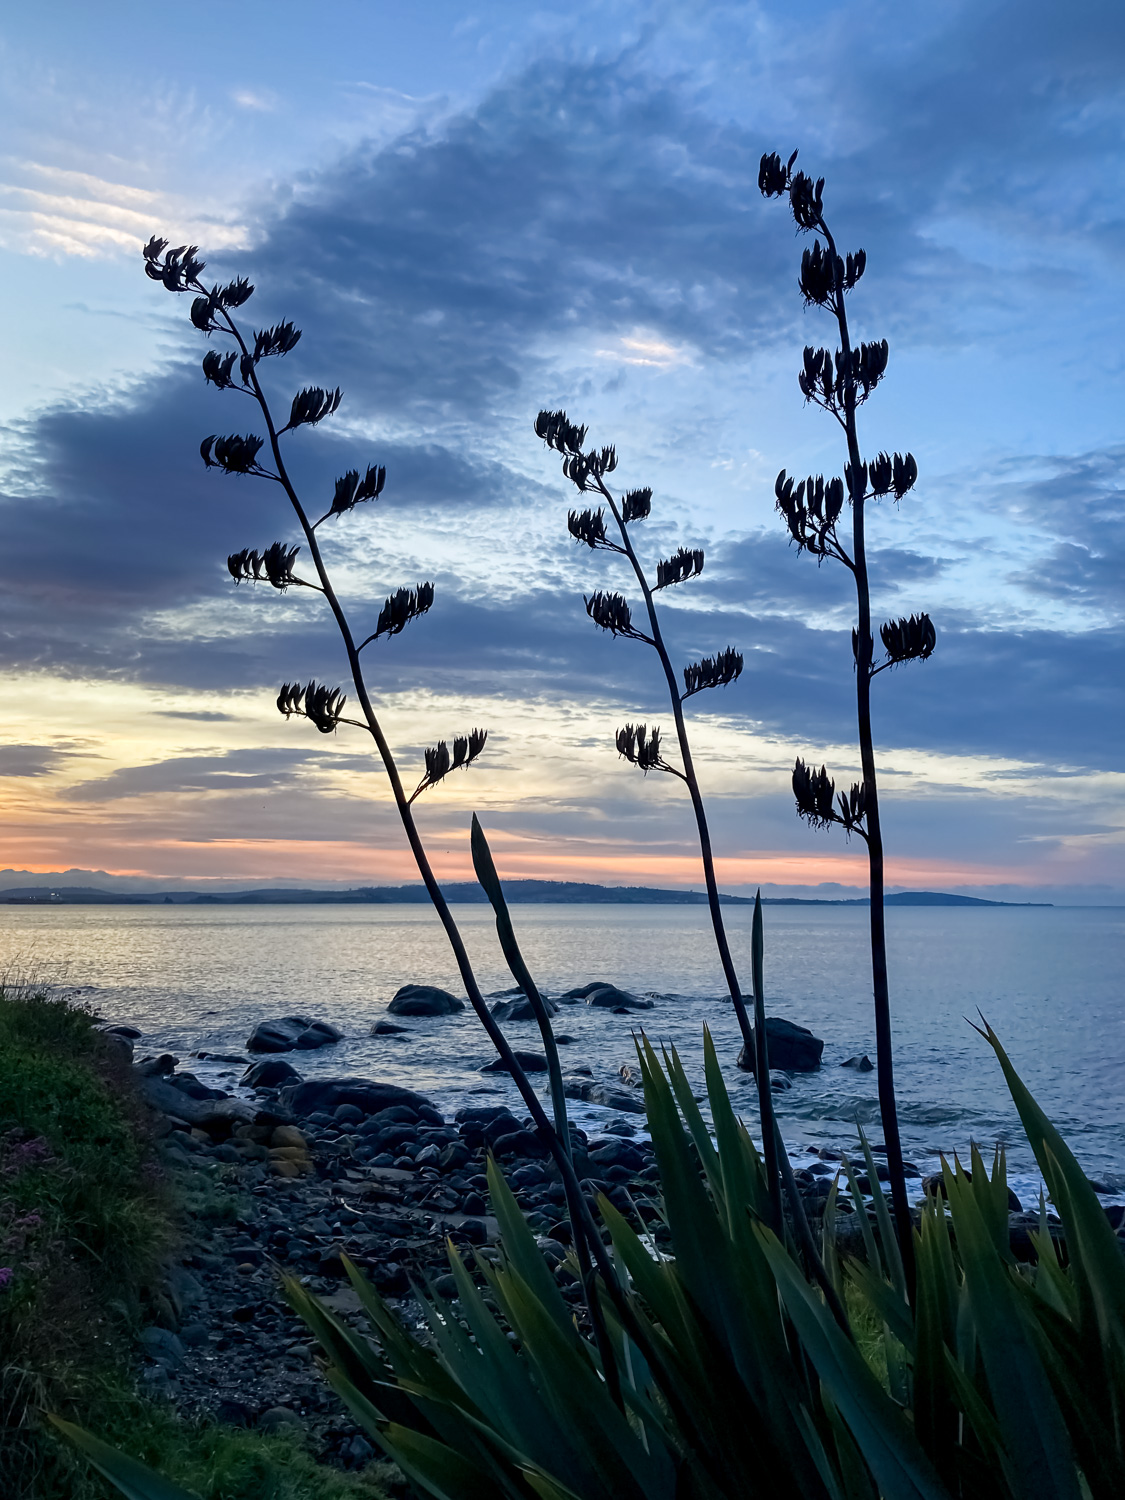 Three large flax stalks and a new one growing, silhouetted against a sunrise at the beach